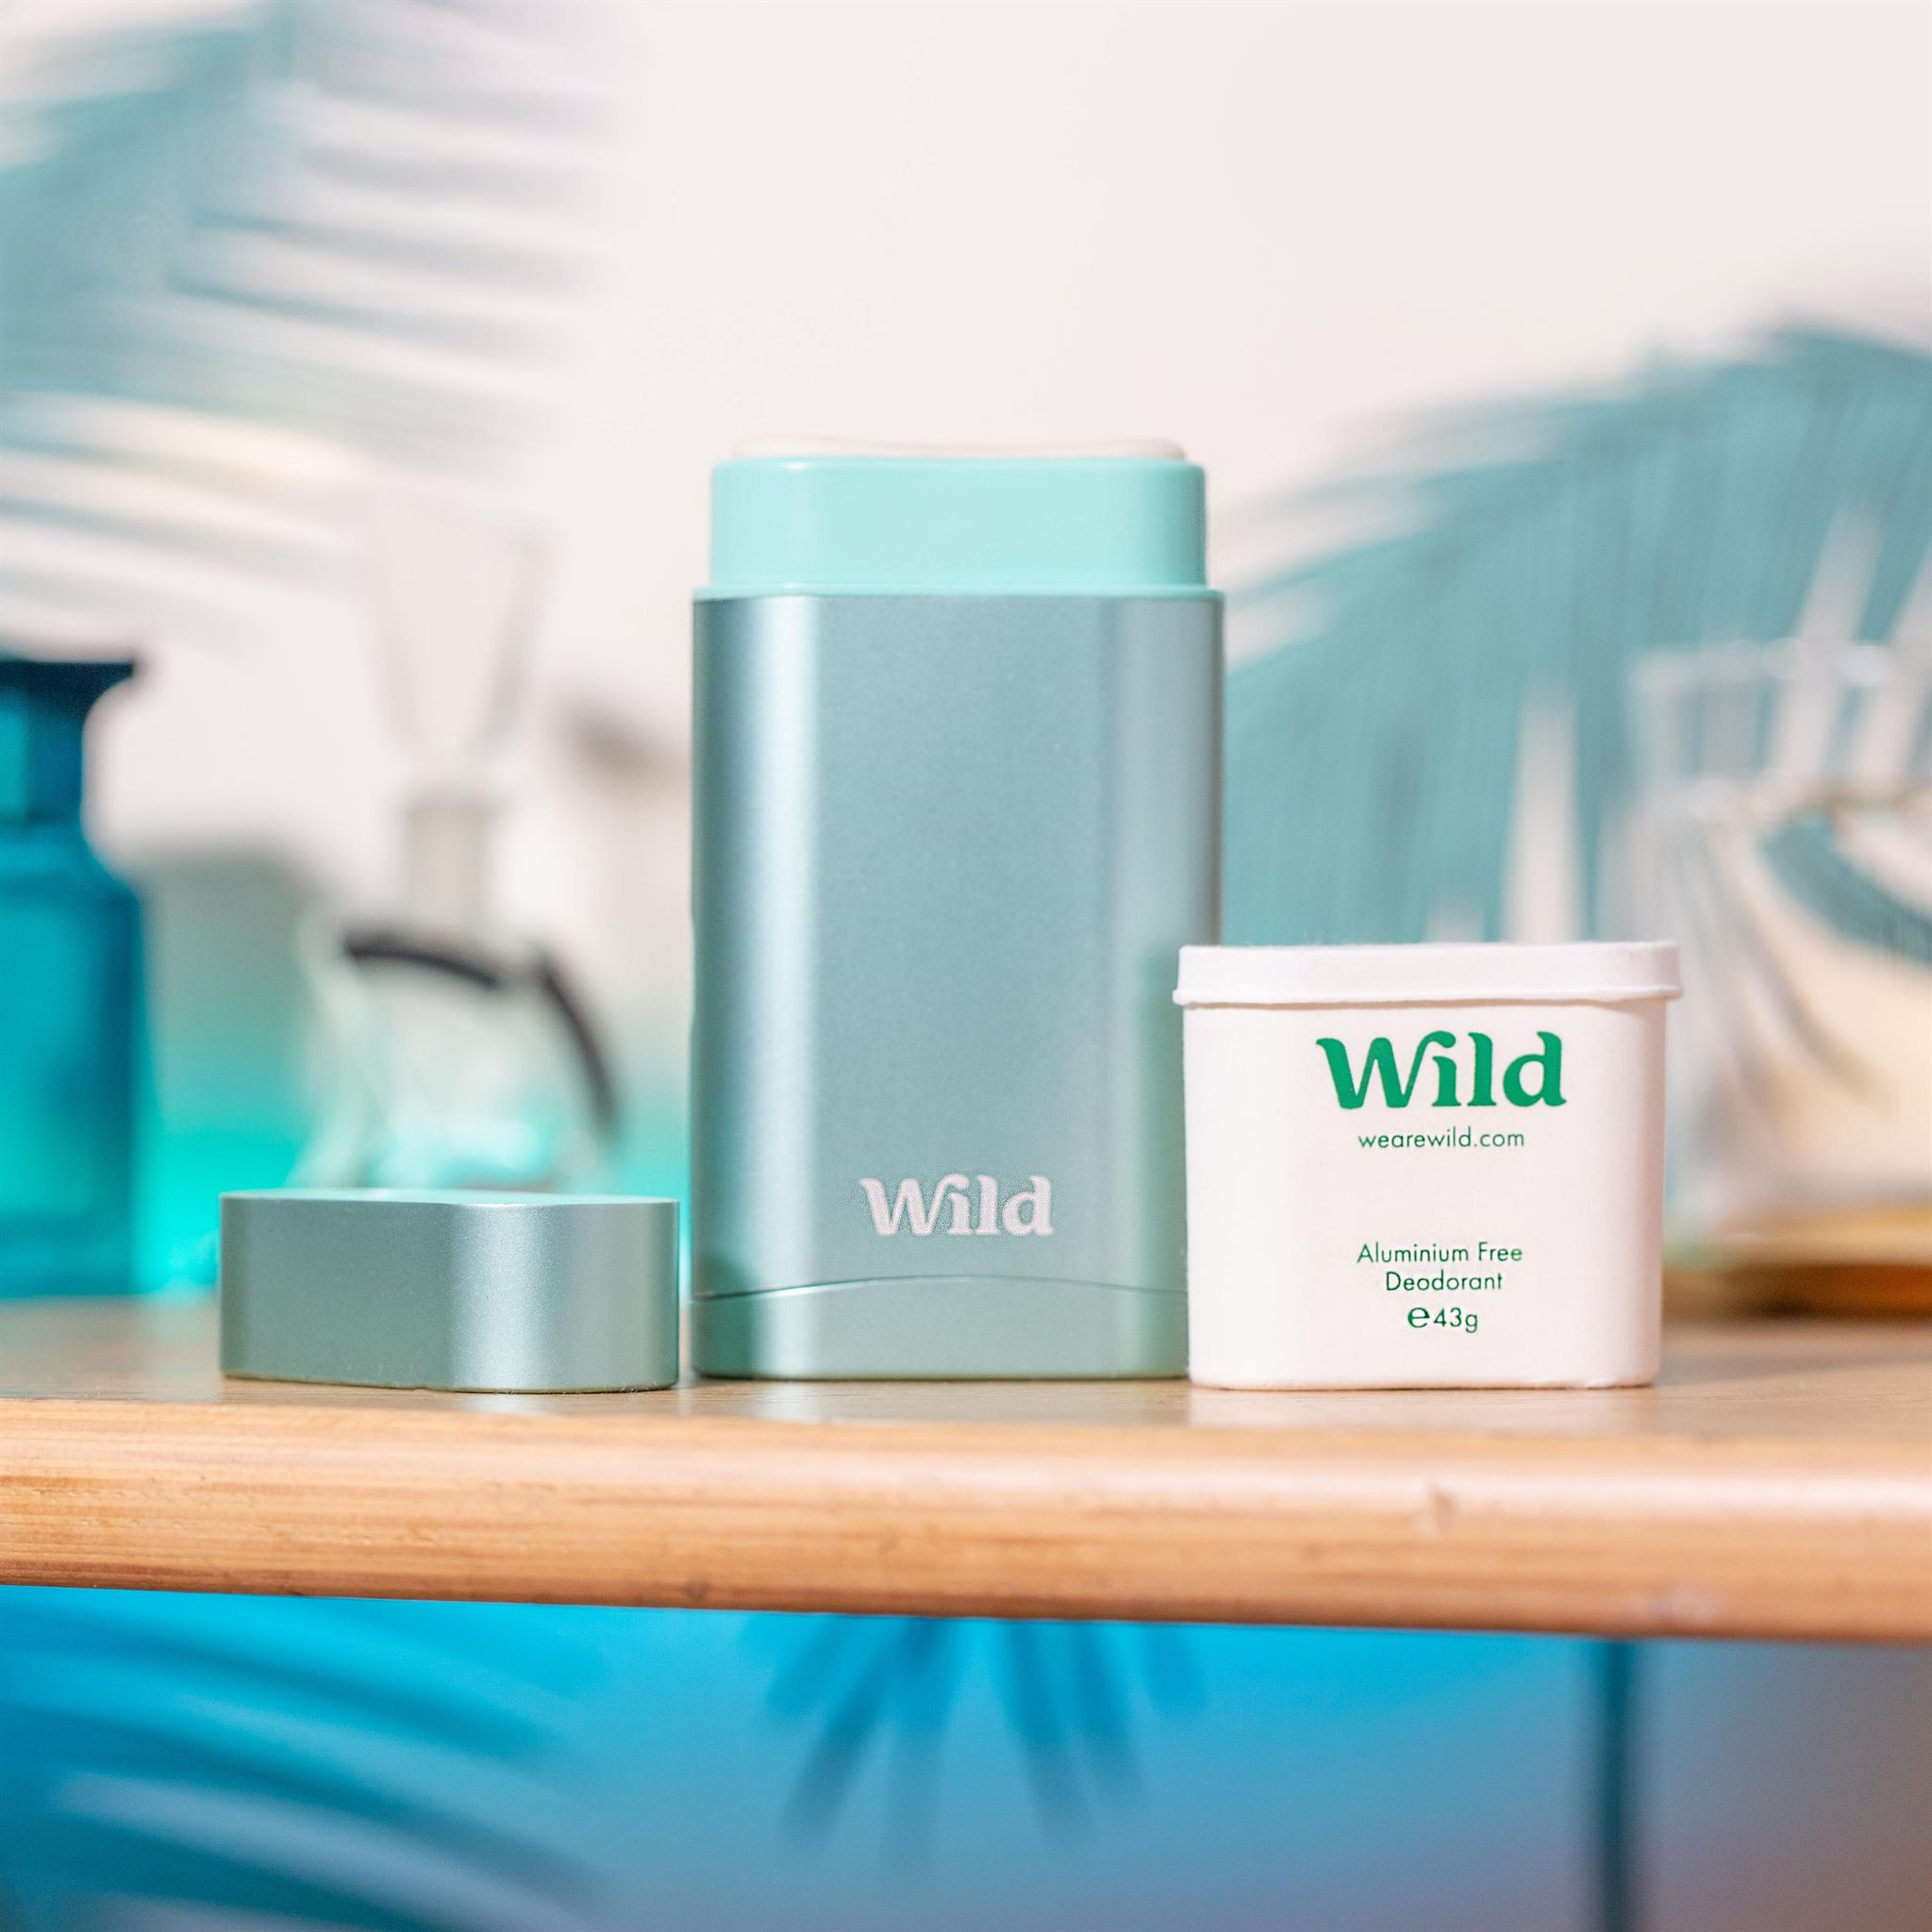 How to fill/refill your Wild refillable deodorant case